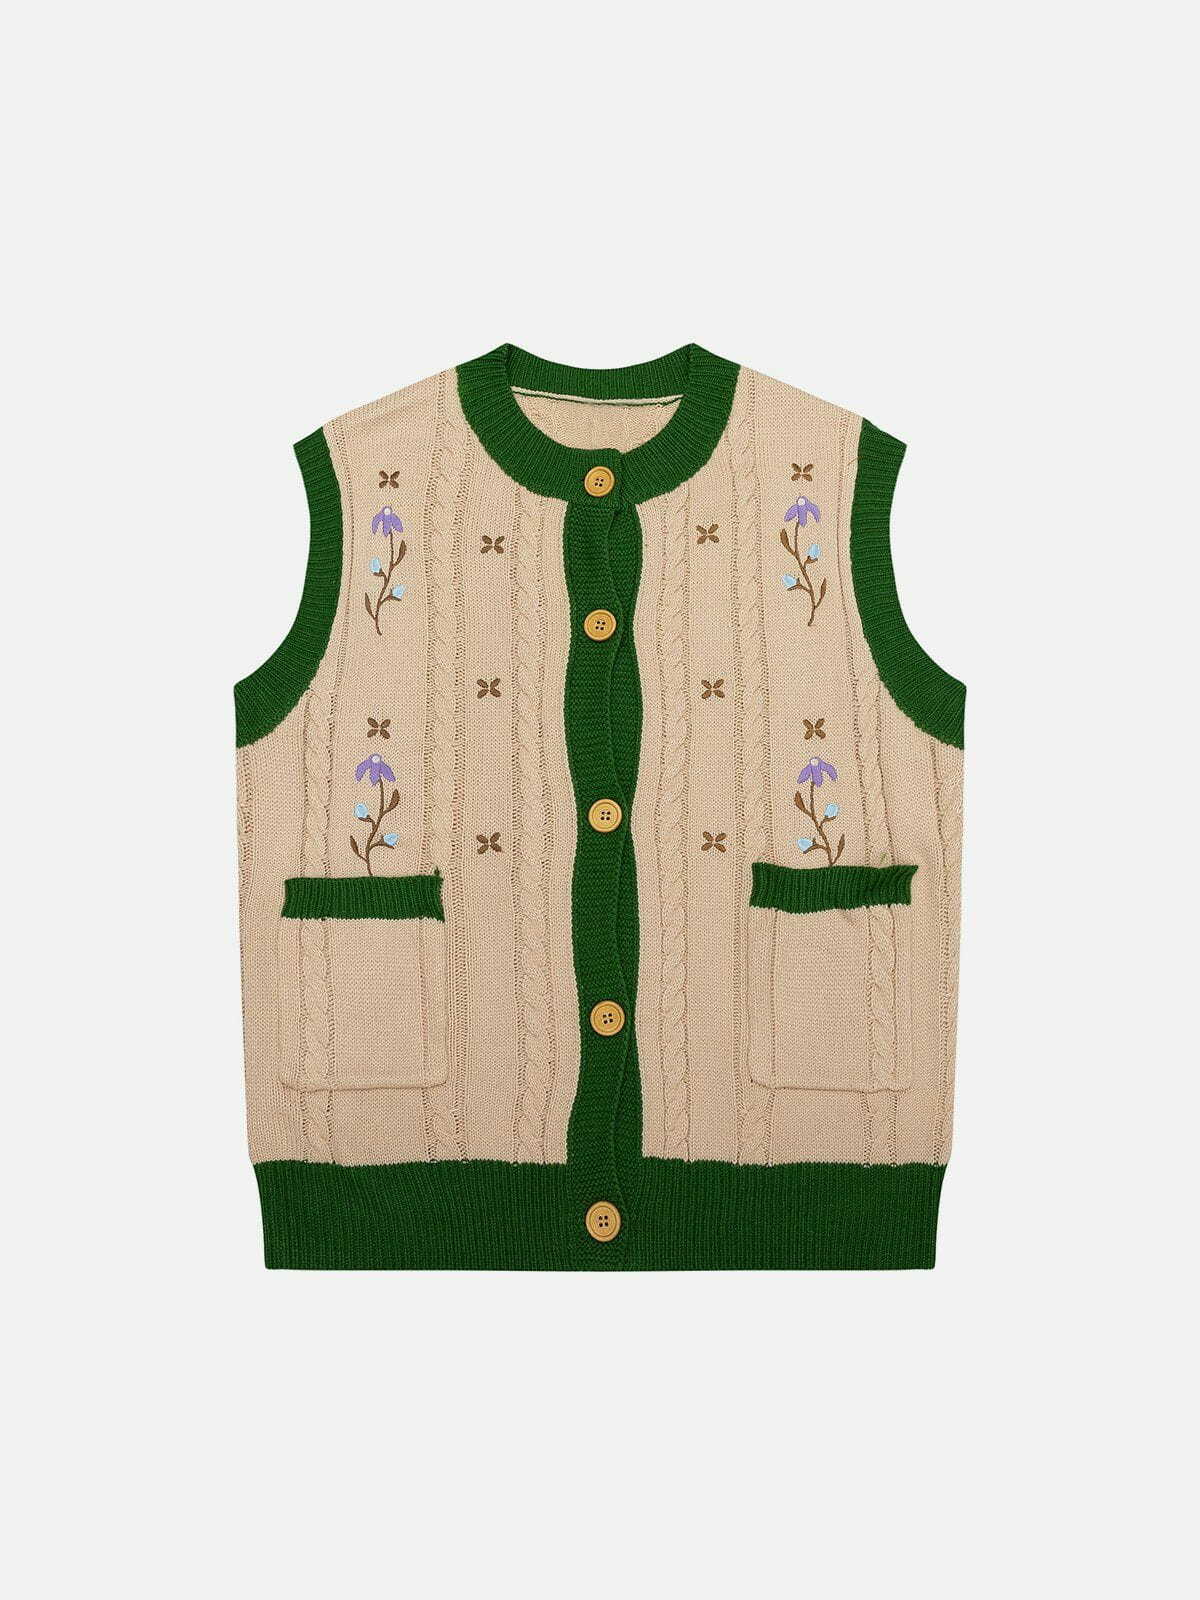 vintage embroidery sweater vest quirky embellished y2k fashion 5924